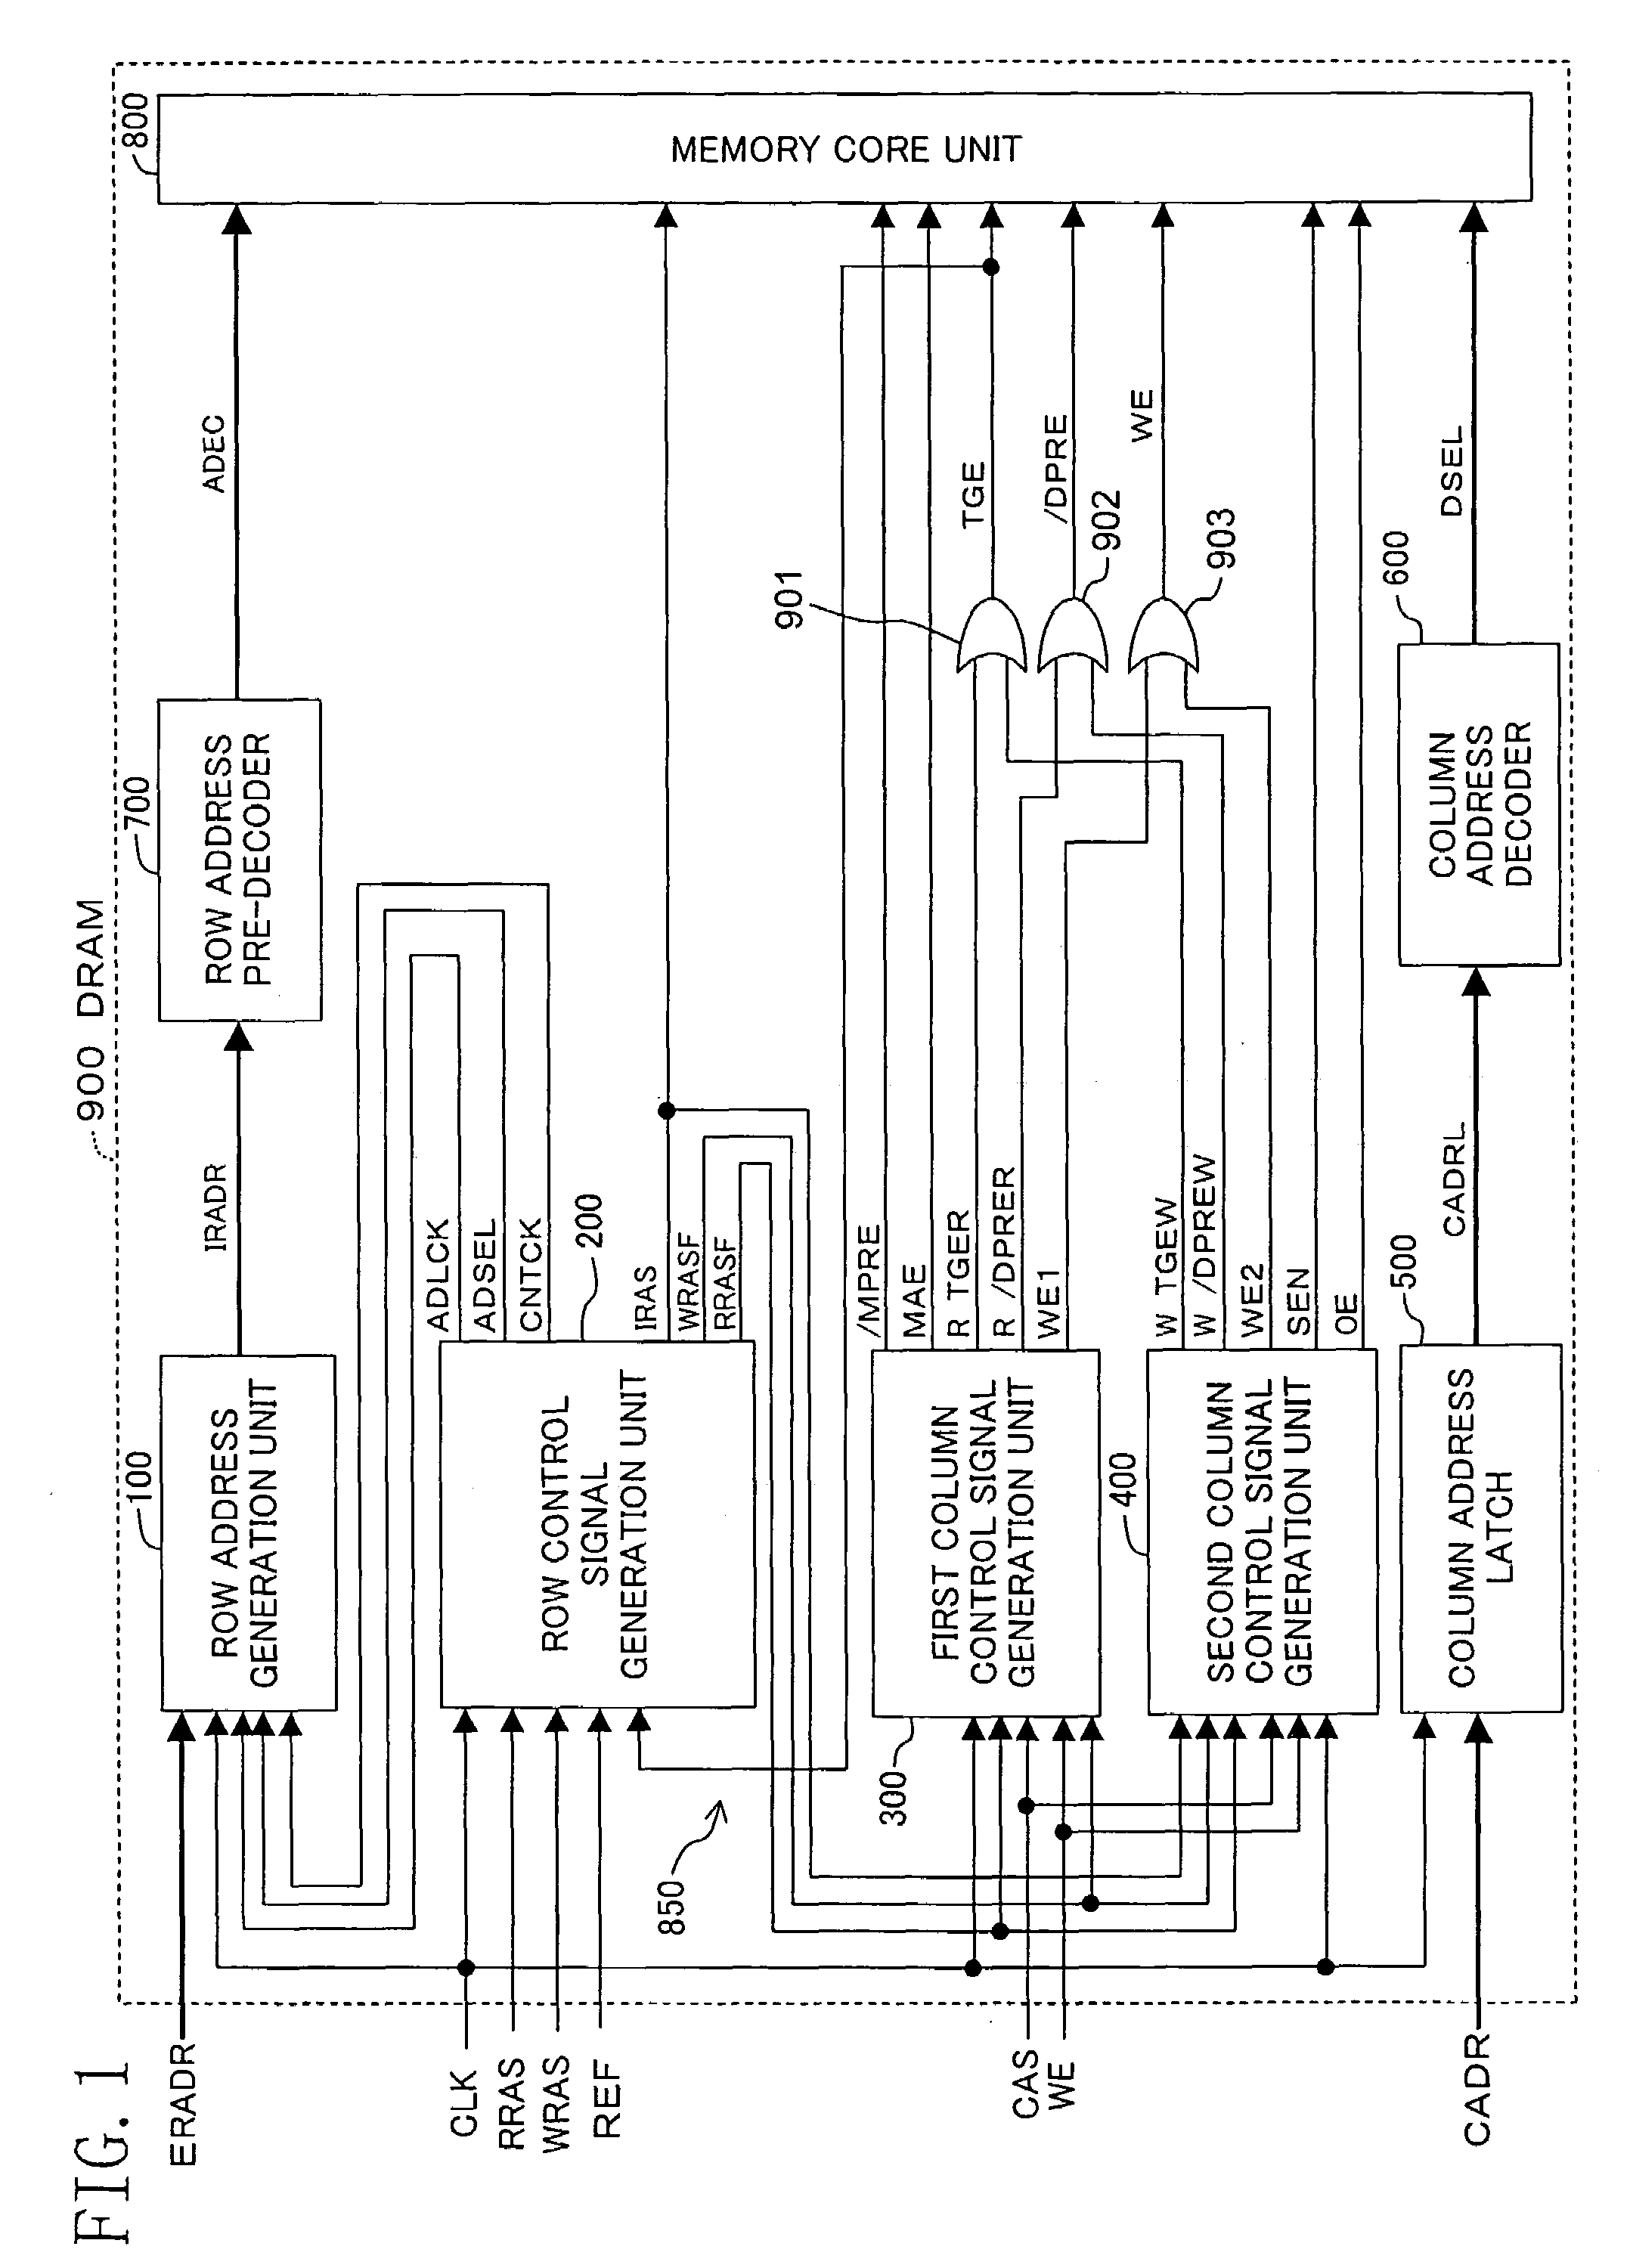 Semiconductor device having read and write operations corresponding to read and write row control signals